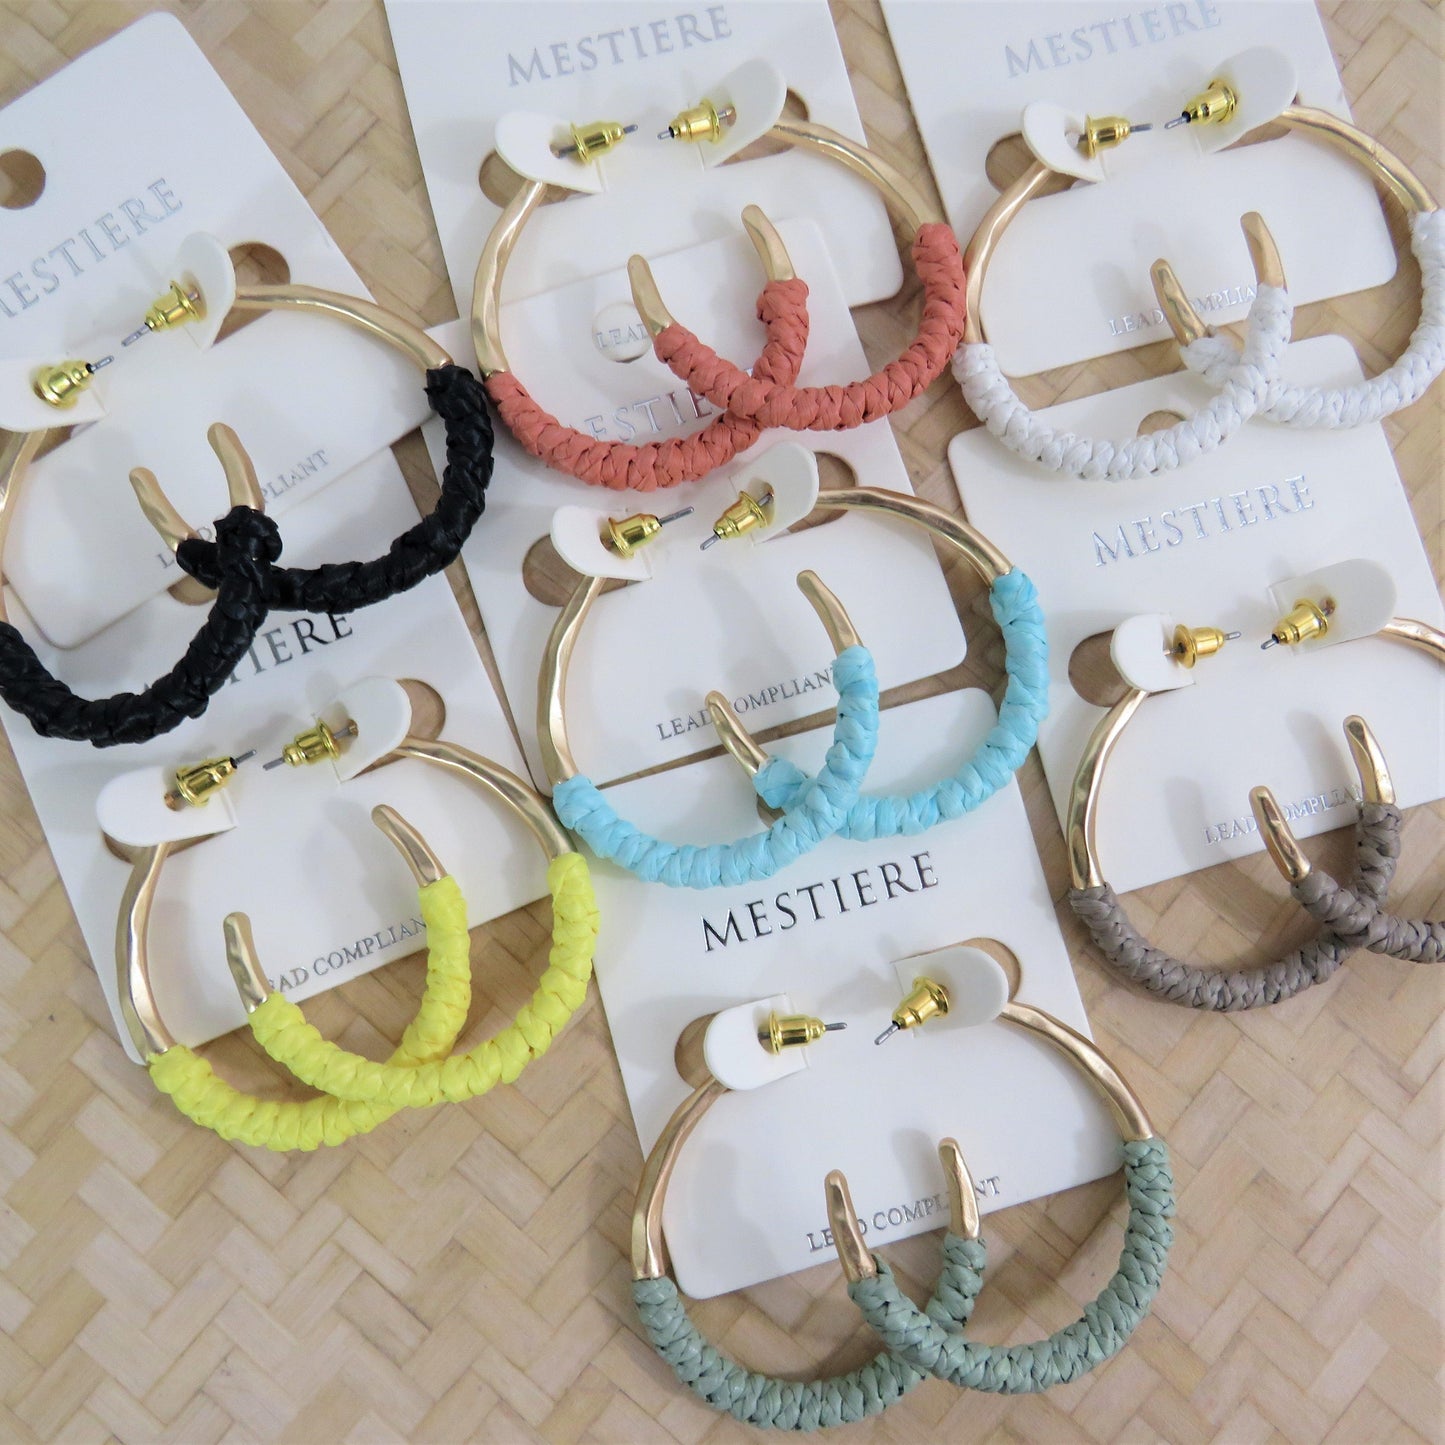 7 pair of rattan wrapped gold hoops in several colors on a rattan back ground